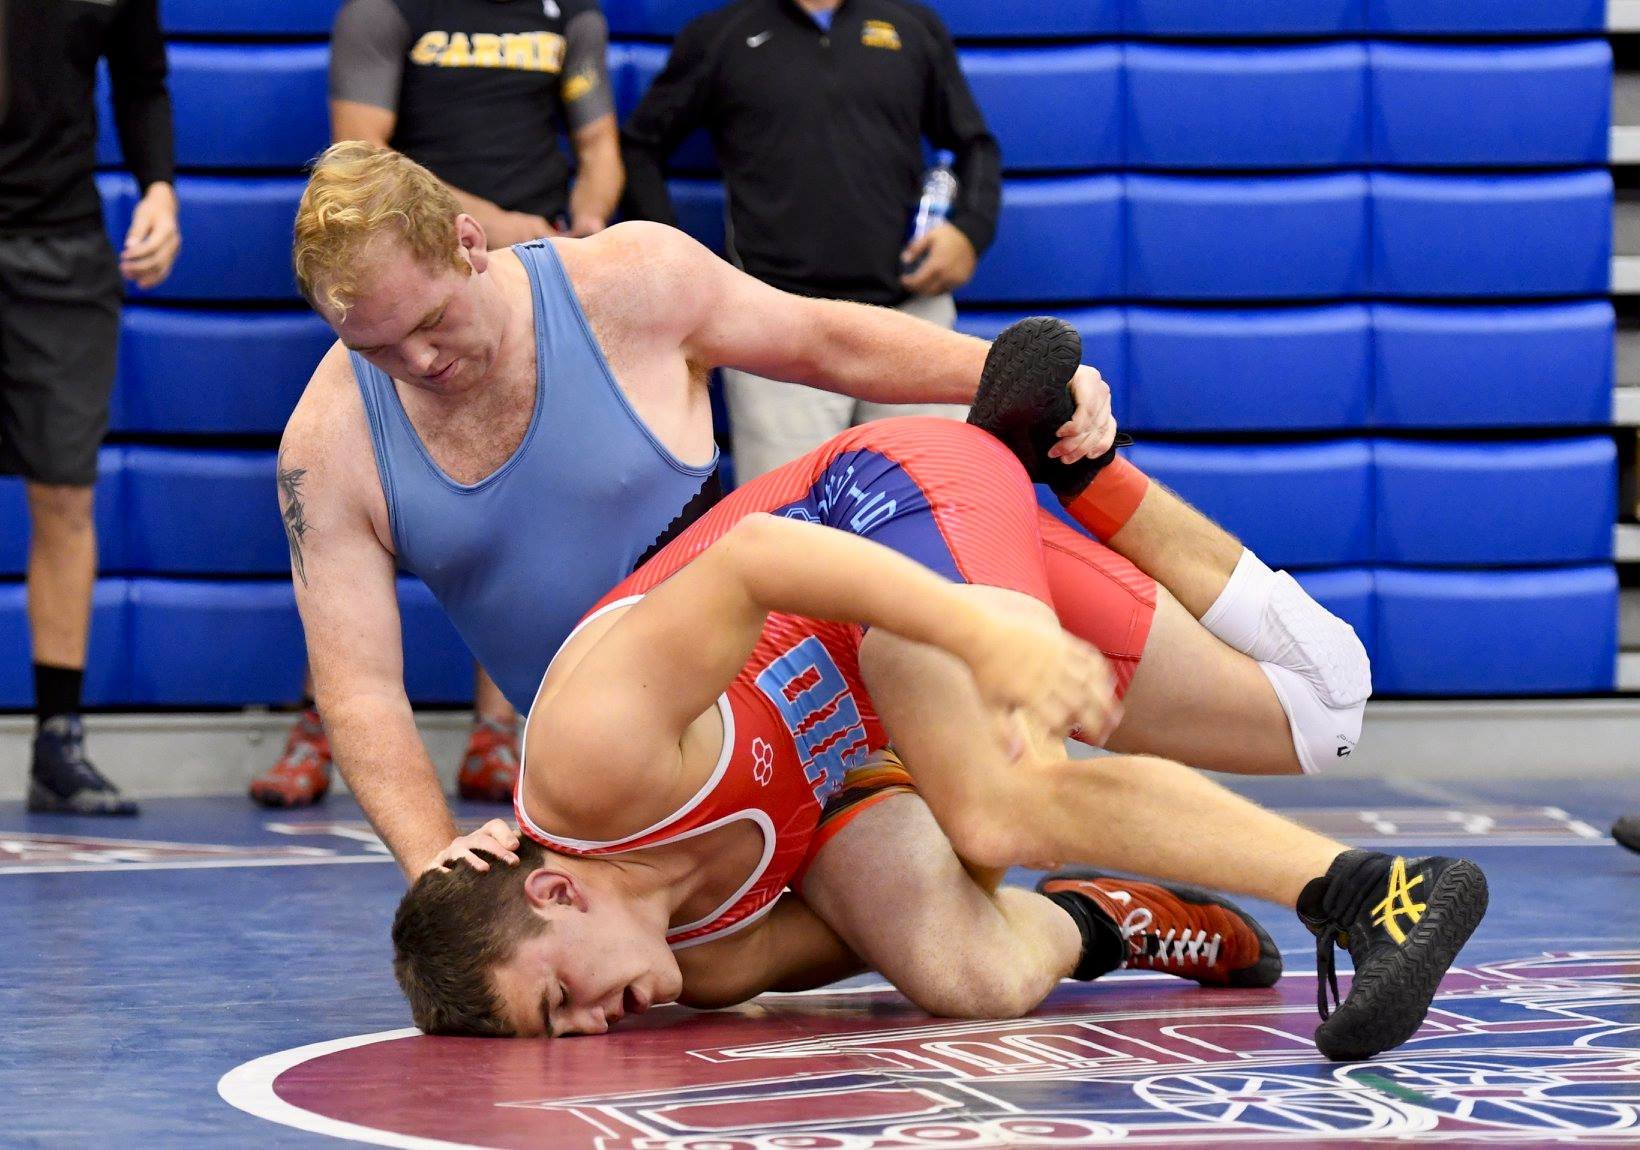 More information about "#WrestlingWednesday: Cornwell looking to finish on top"